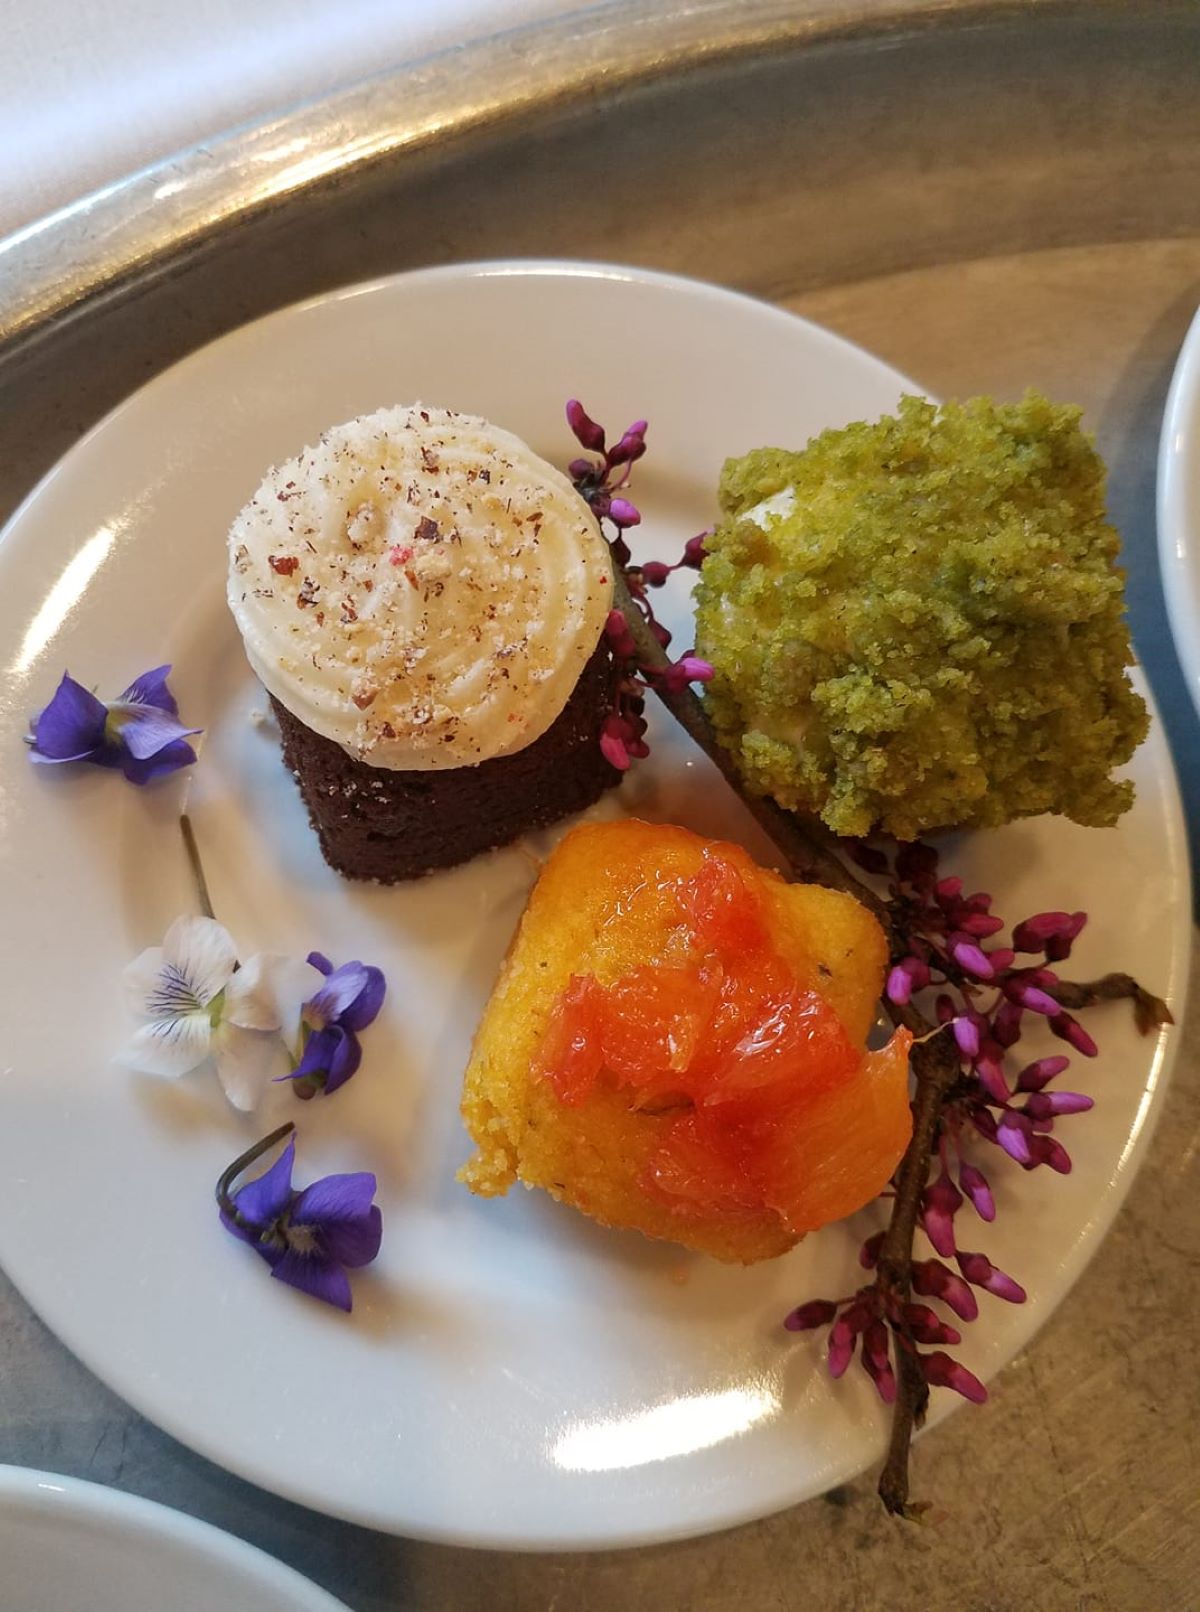 From Allertonâ€™s Forest to mansion dinner, in 2018, three desserts, brown/white, orange, and green, on a round, white plate. The plate is decorated with purple and white violets and redbud twig with closed buds. Photo by Nate Becca.